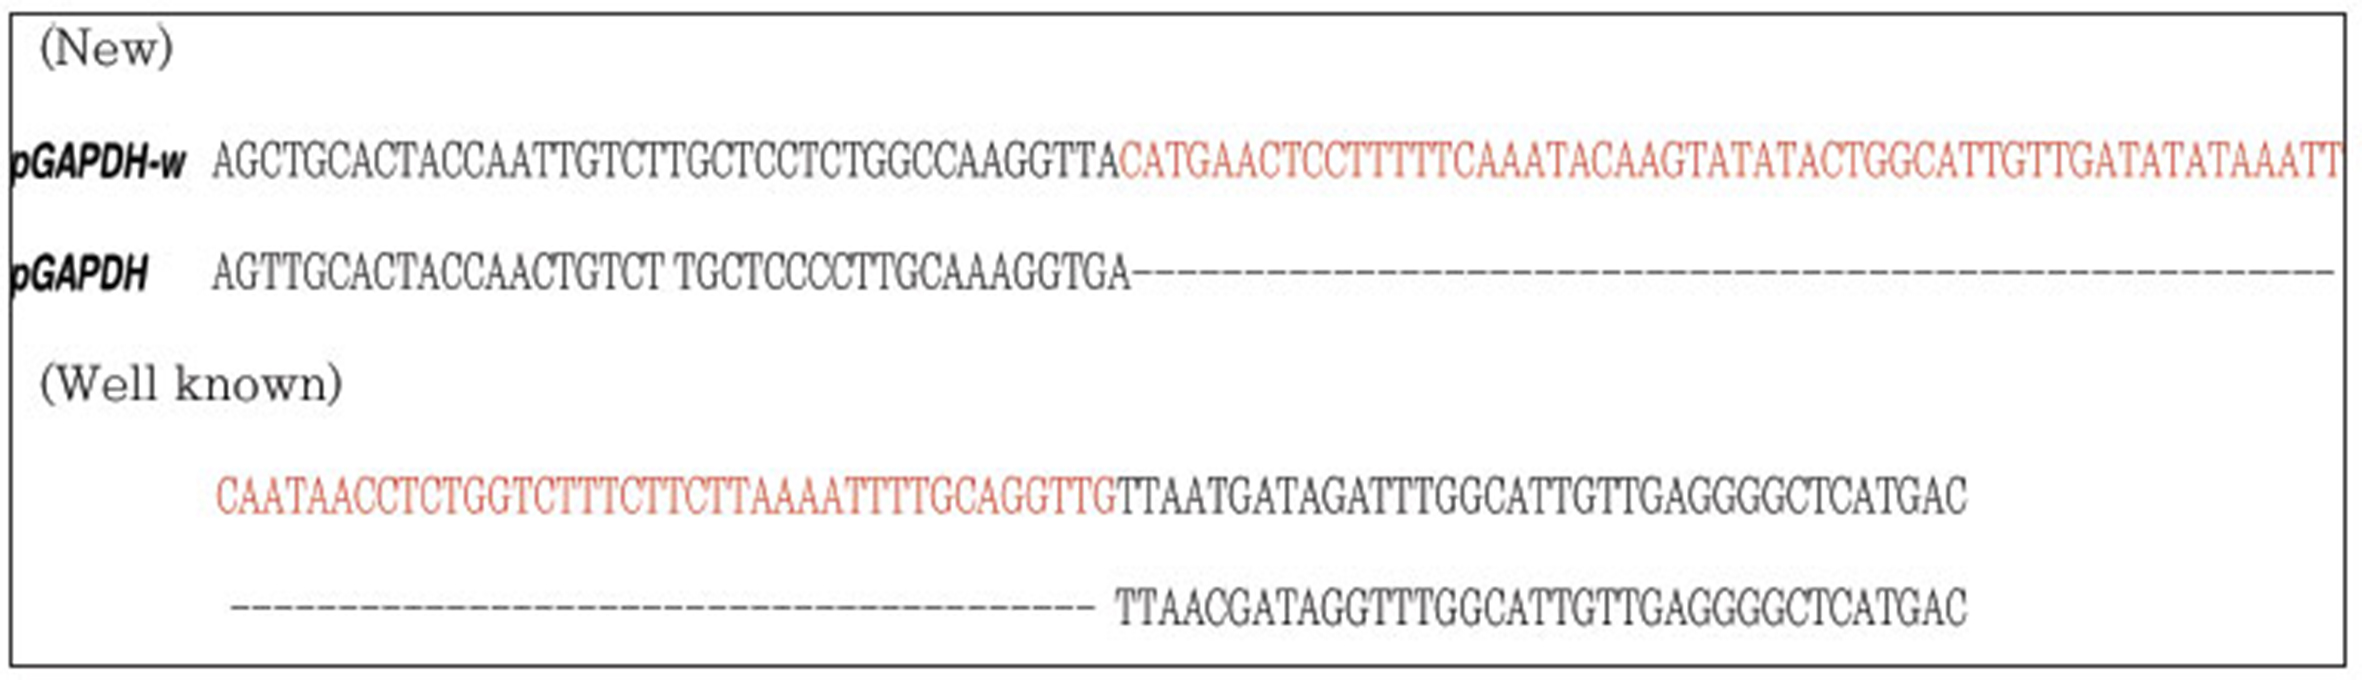 DNA sequence alignment of the pGAPDH-w gene with known pGAPDH genes across the species. Novel sequences are in red.